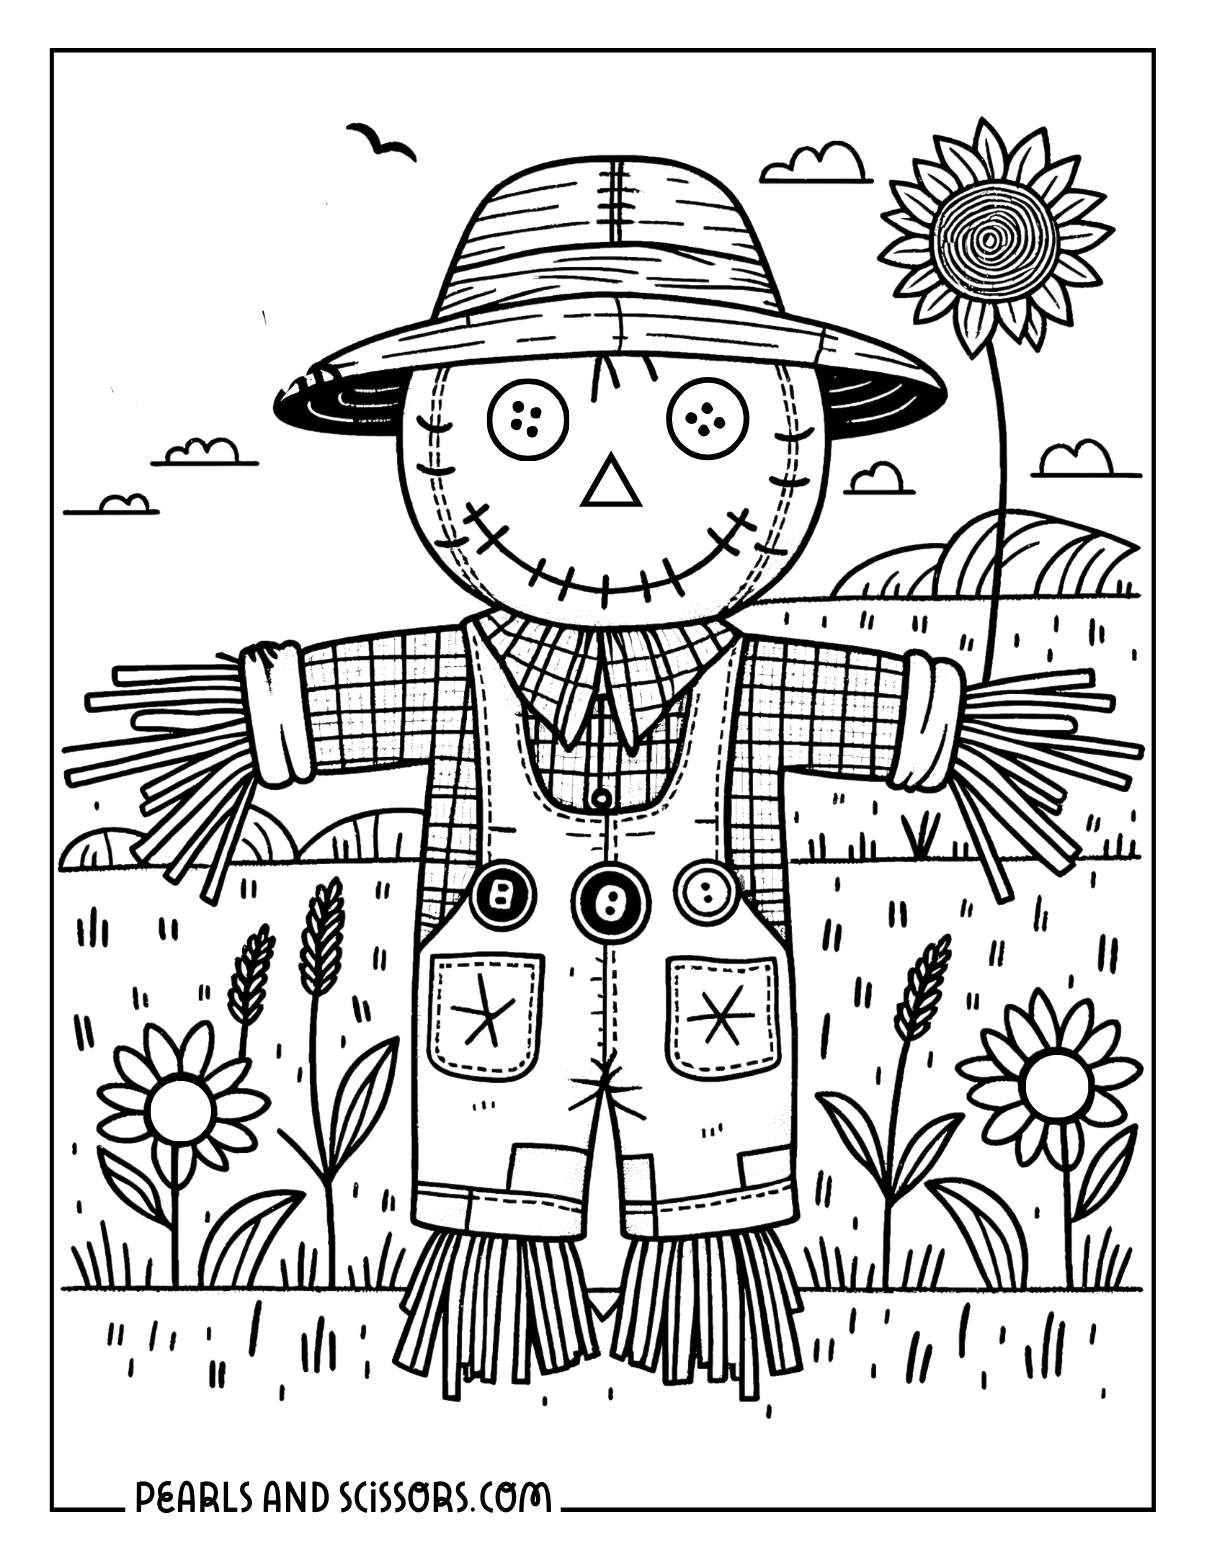 Scarecrow protecting the harvest wreath thanksgiving coloring sheet.